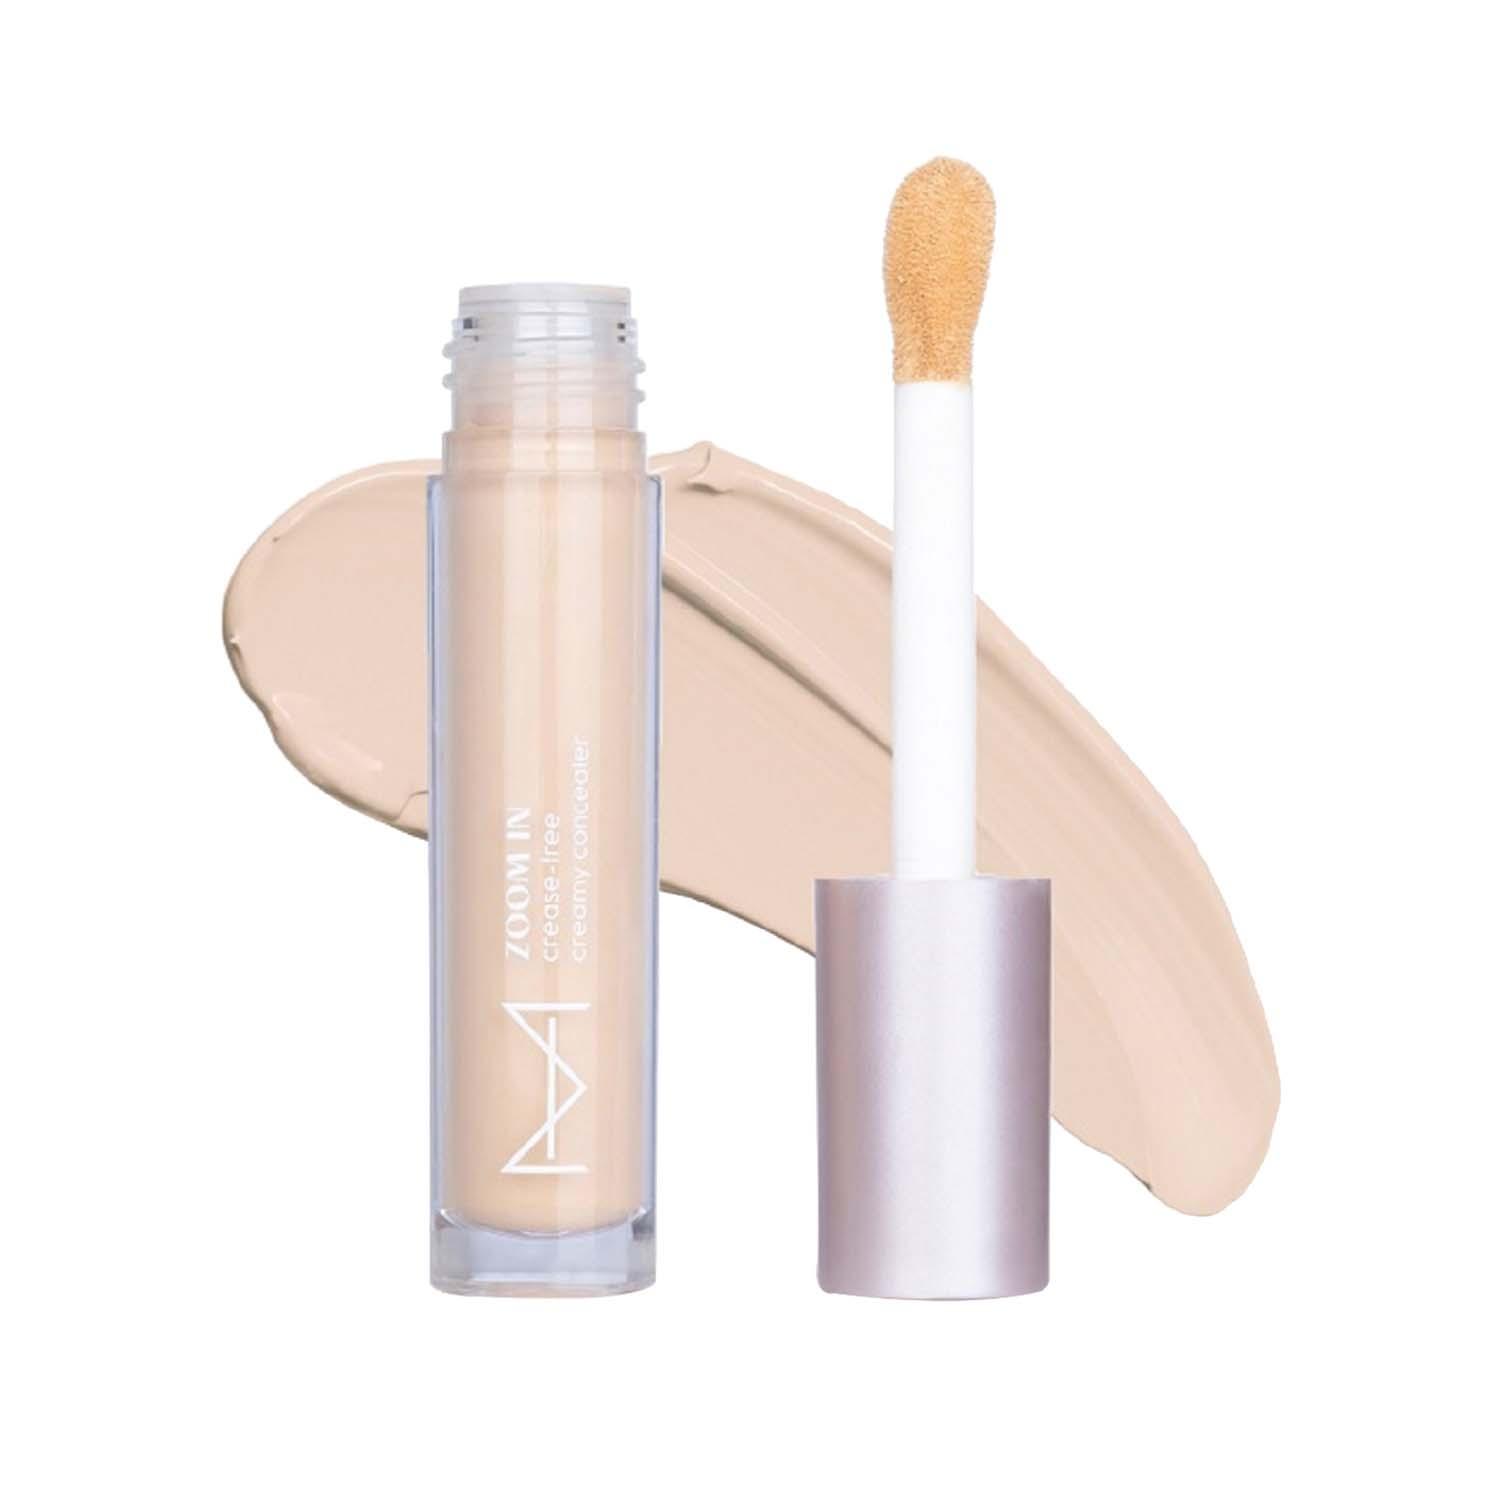 HOUSE OF MAKEUP | HOUSE OF MAKEUP Zoom In Crease-Free, Creamy Concealer - FL02 Fair To Light Skin Tone (6 ml)